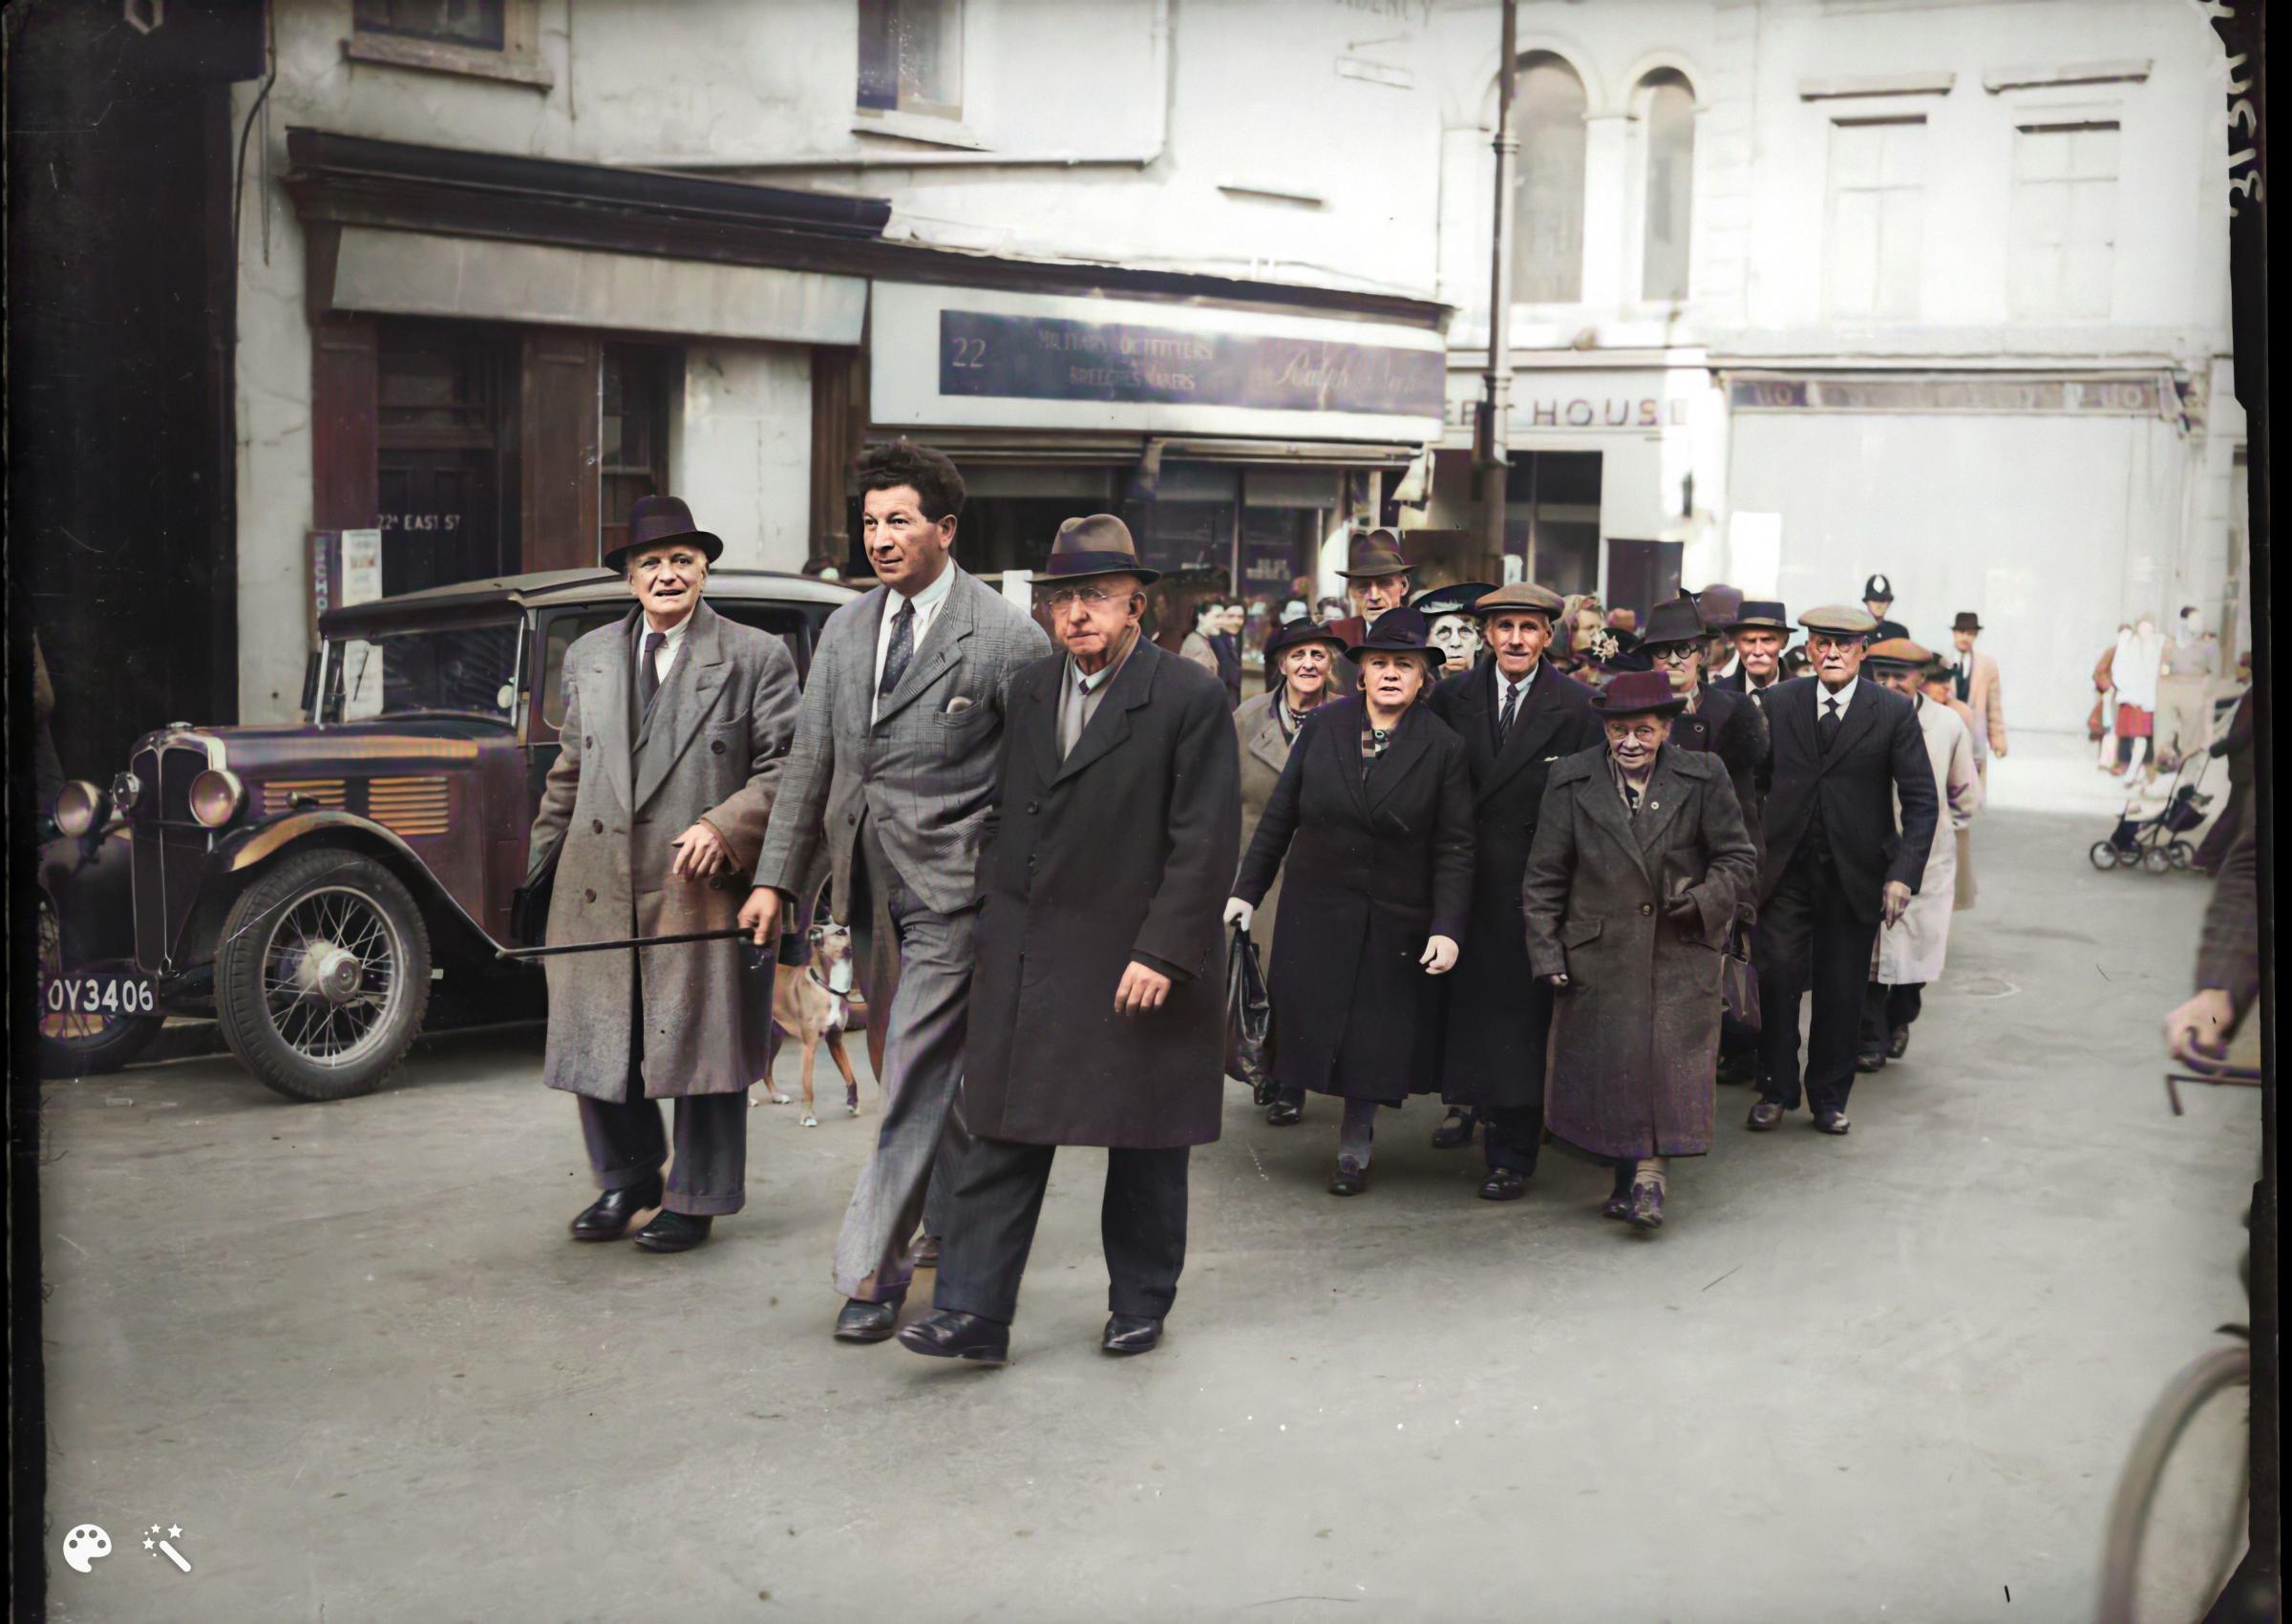 On the march through East Street in 1950